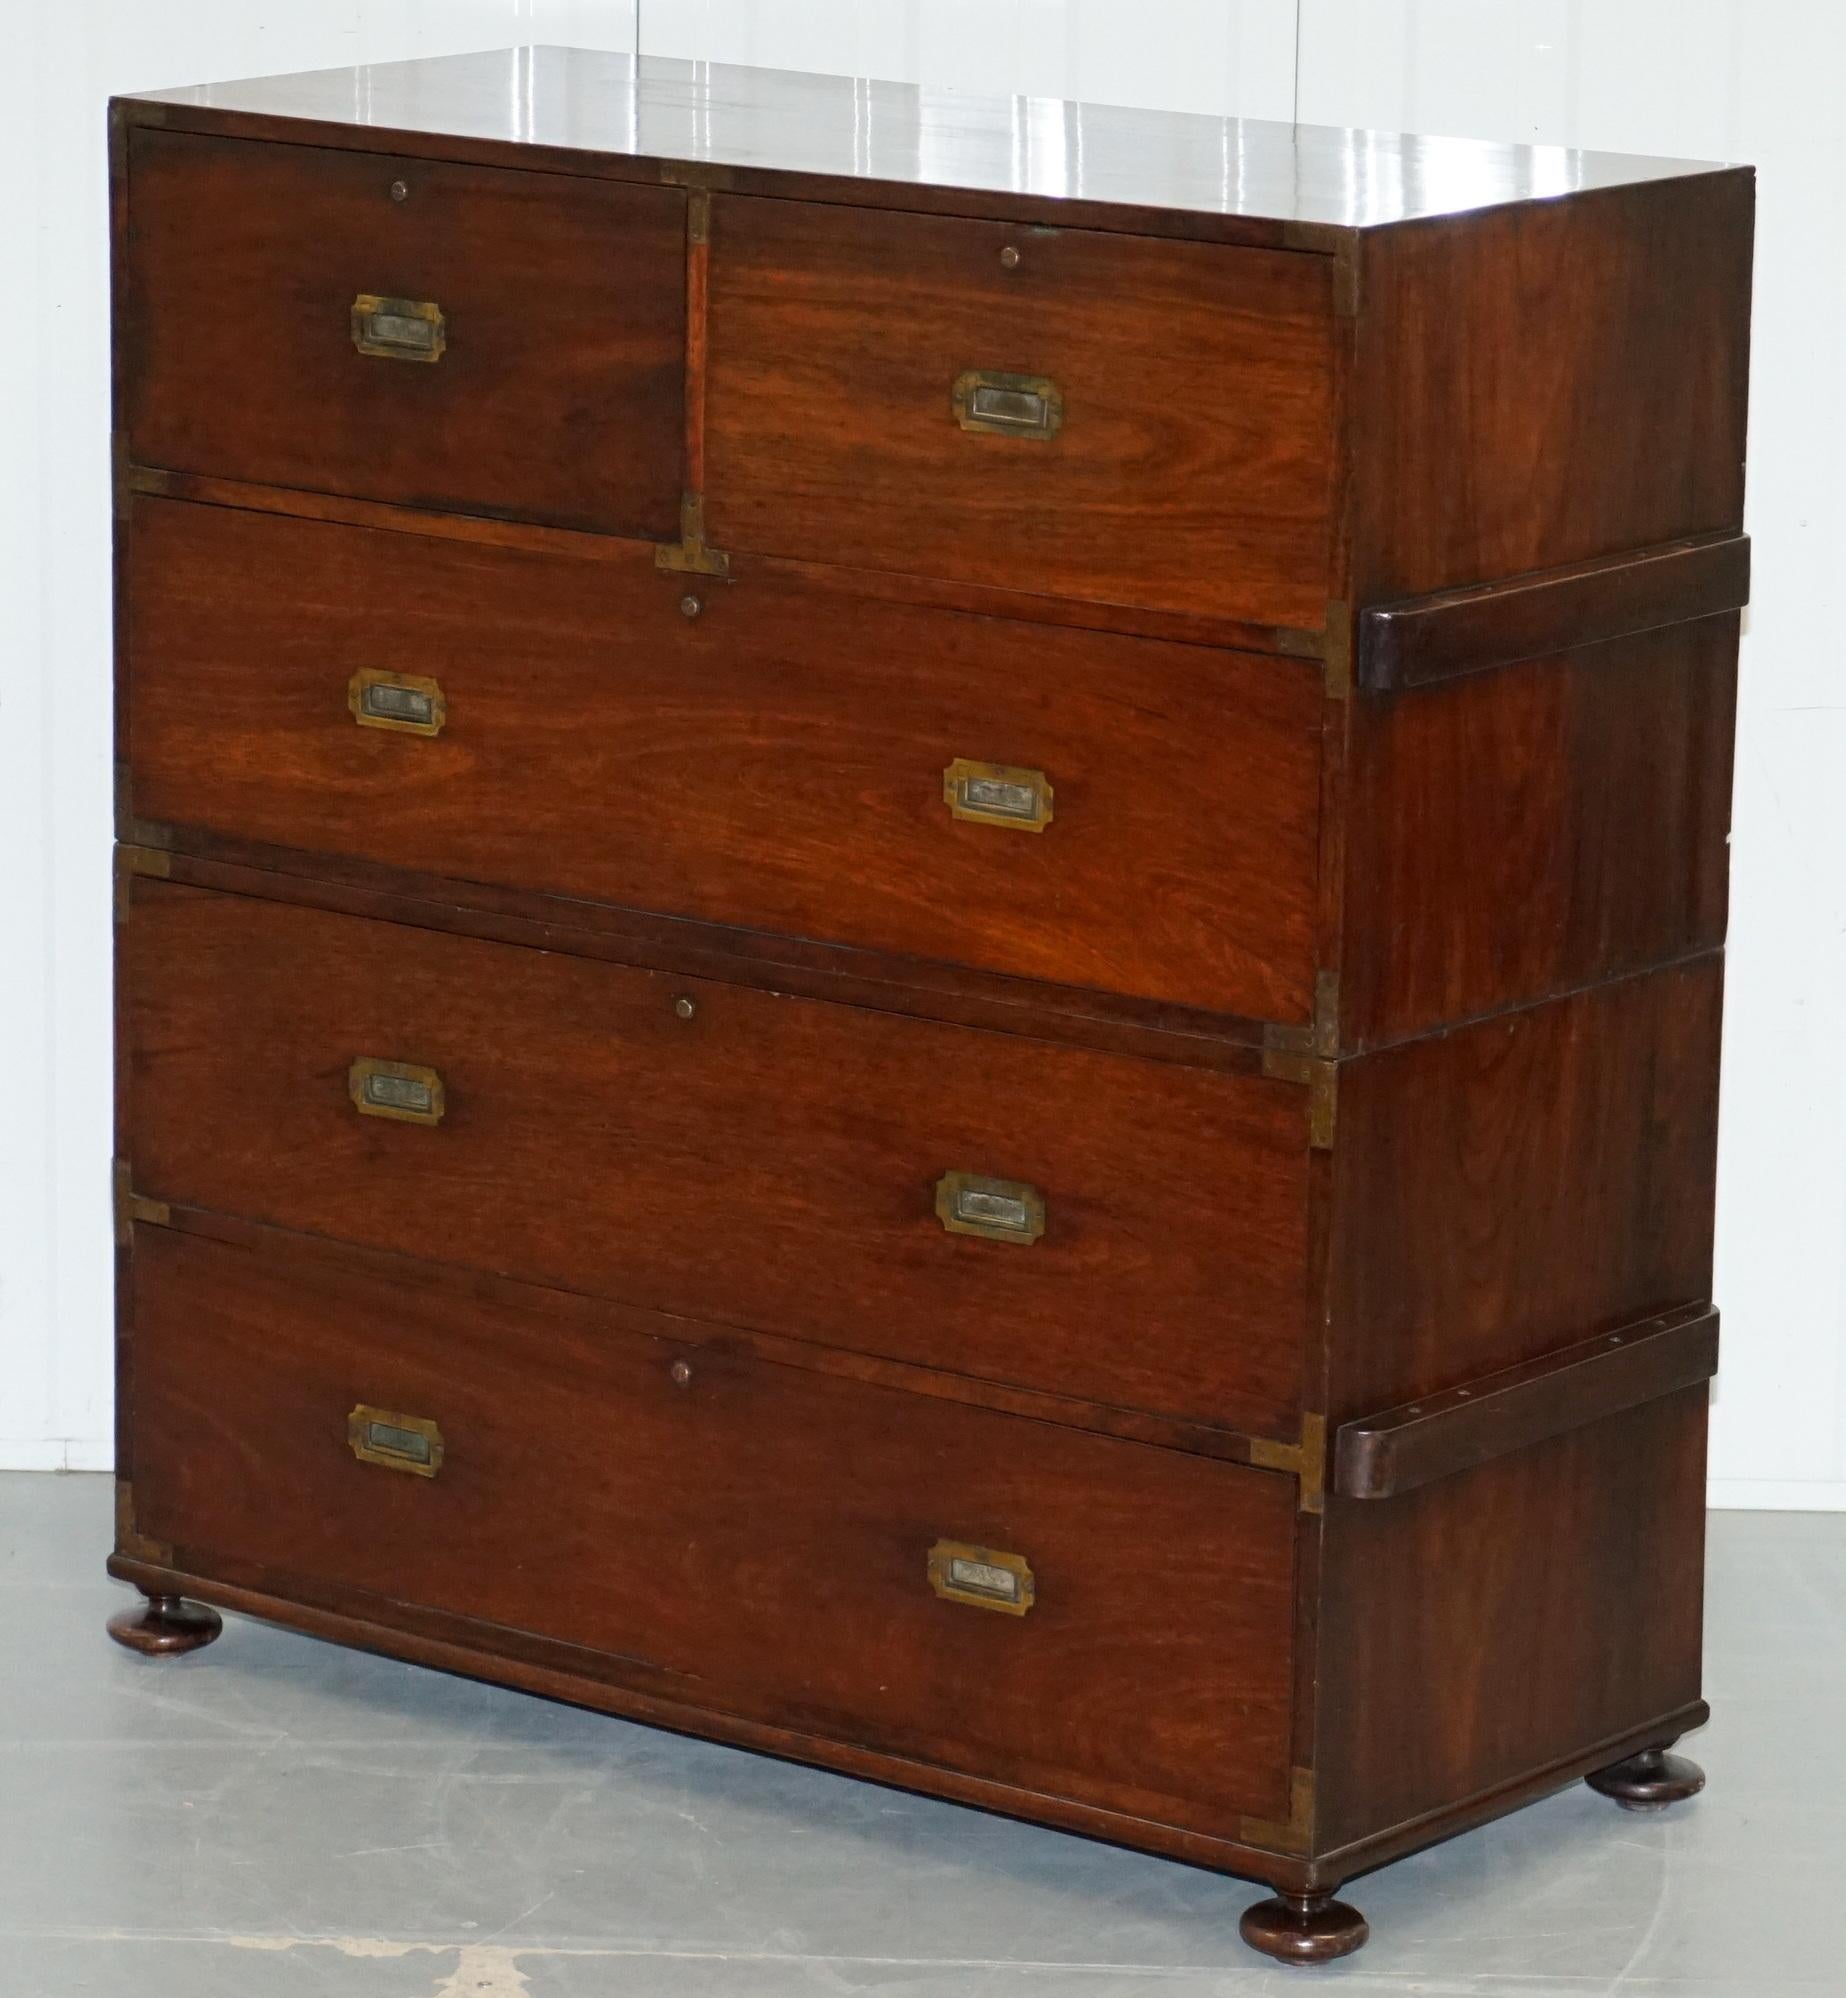 Hand-Crafted Feb 1st 1876 Stamped Camphor Wood Military Campaign Chest of Drawers Secrataire